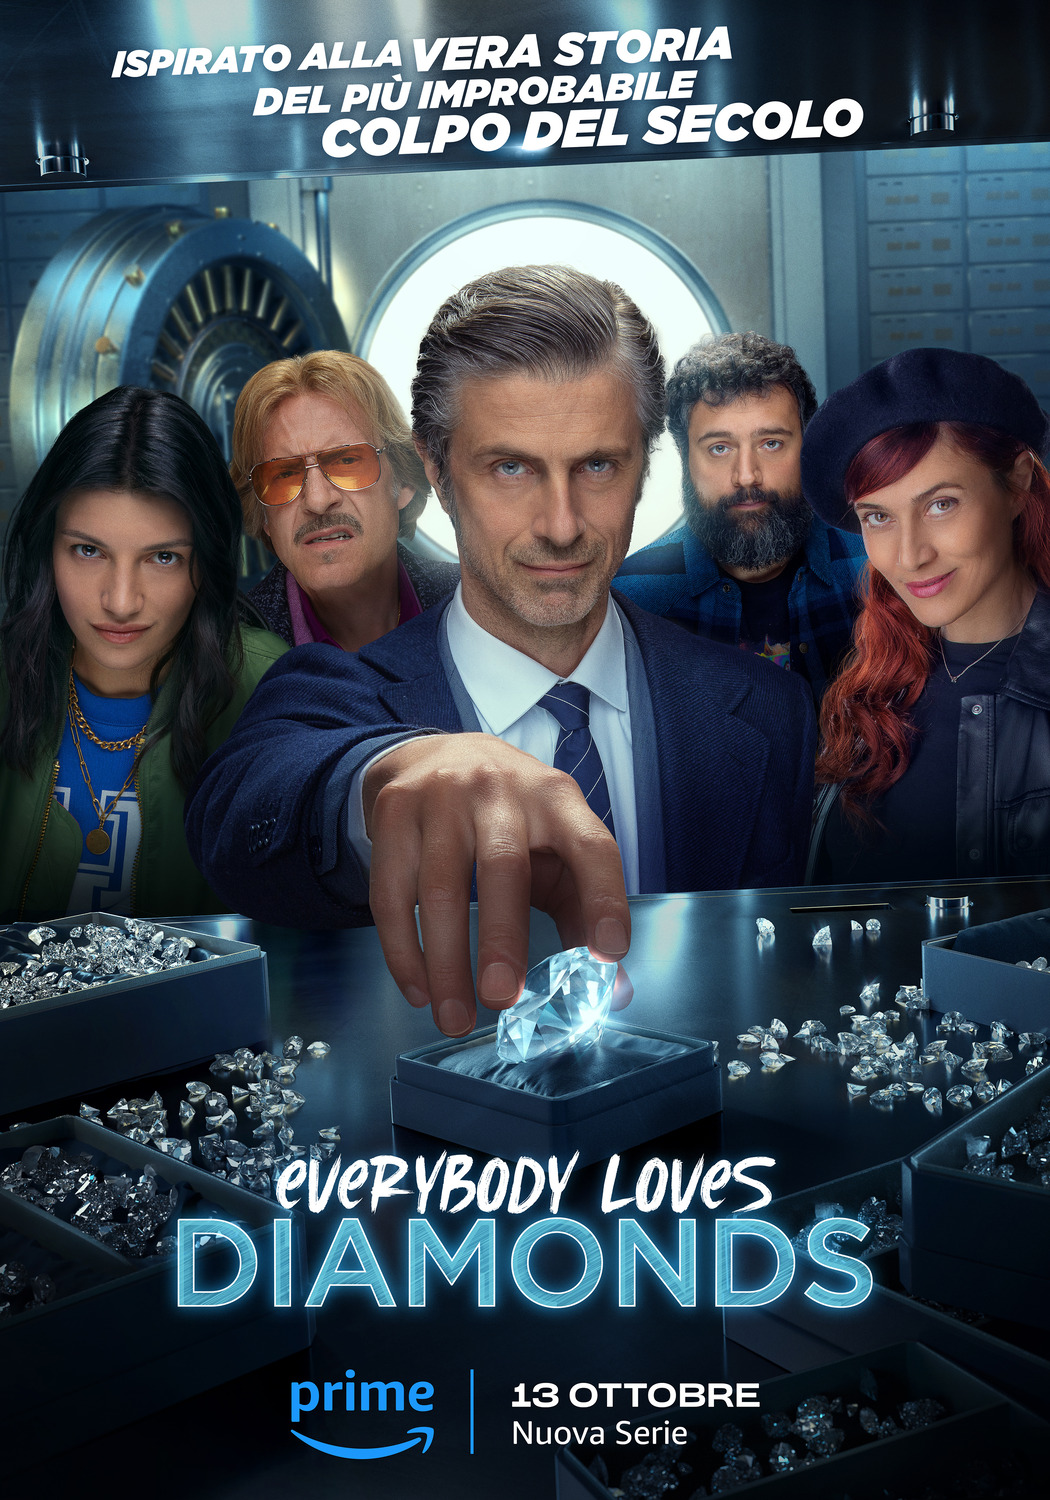 Extra Large TV Poster Image for Everybody Loves Diamonds 